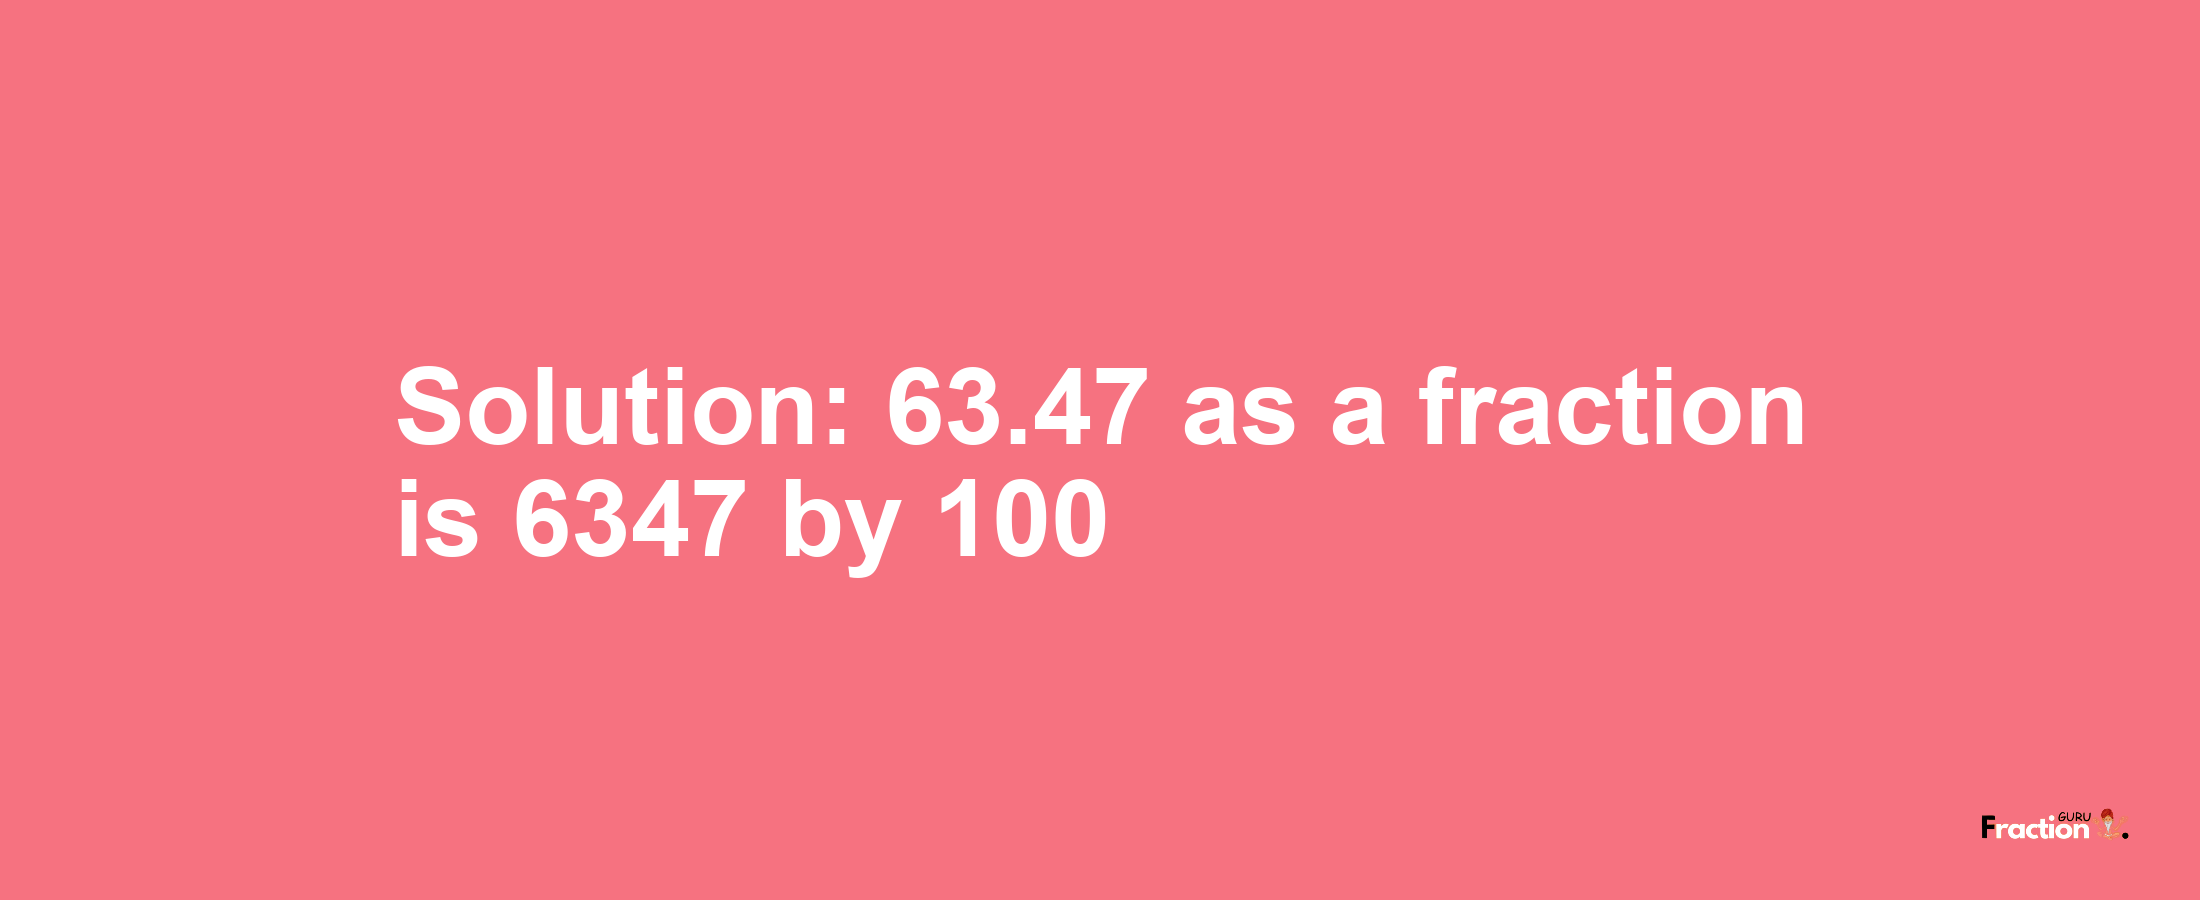 Solution:63.47 as a fraction is 6347/100